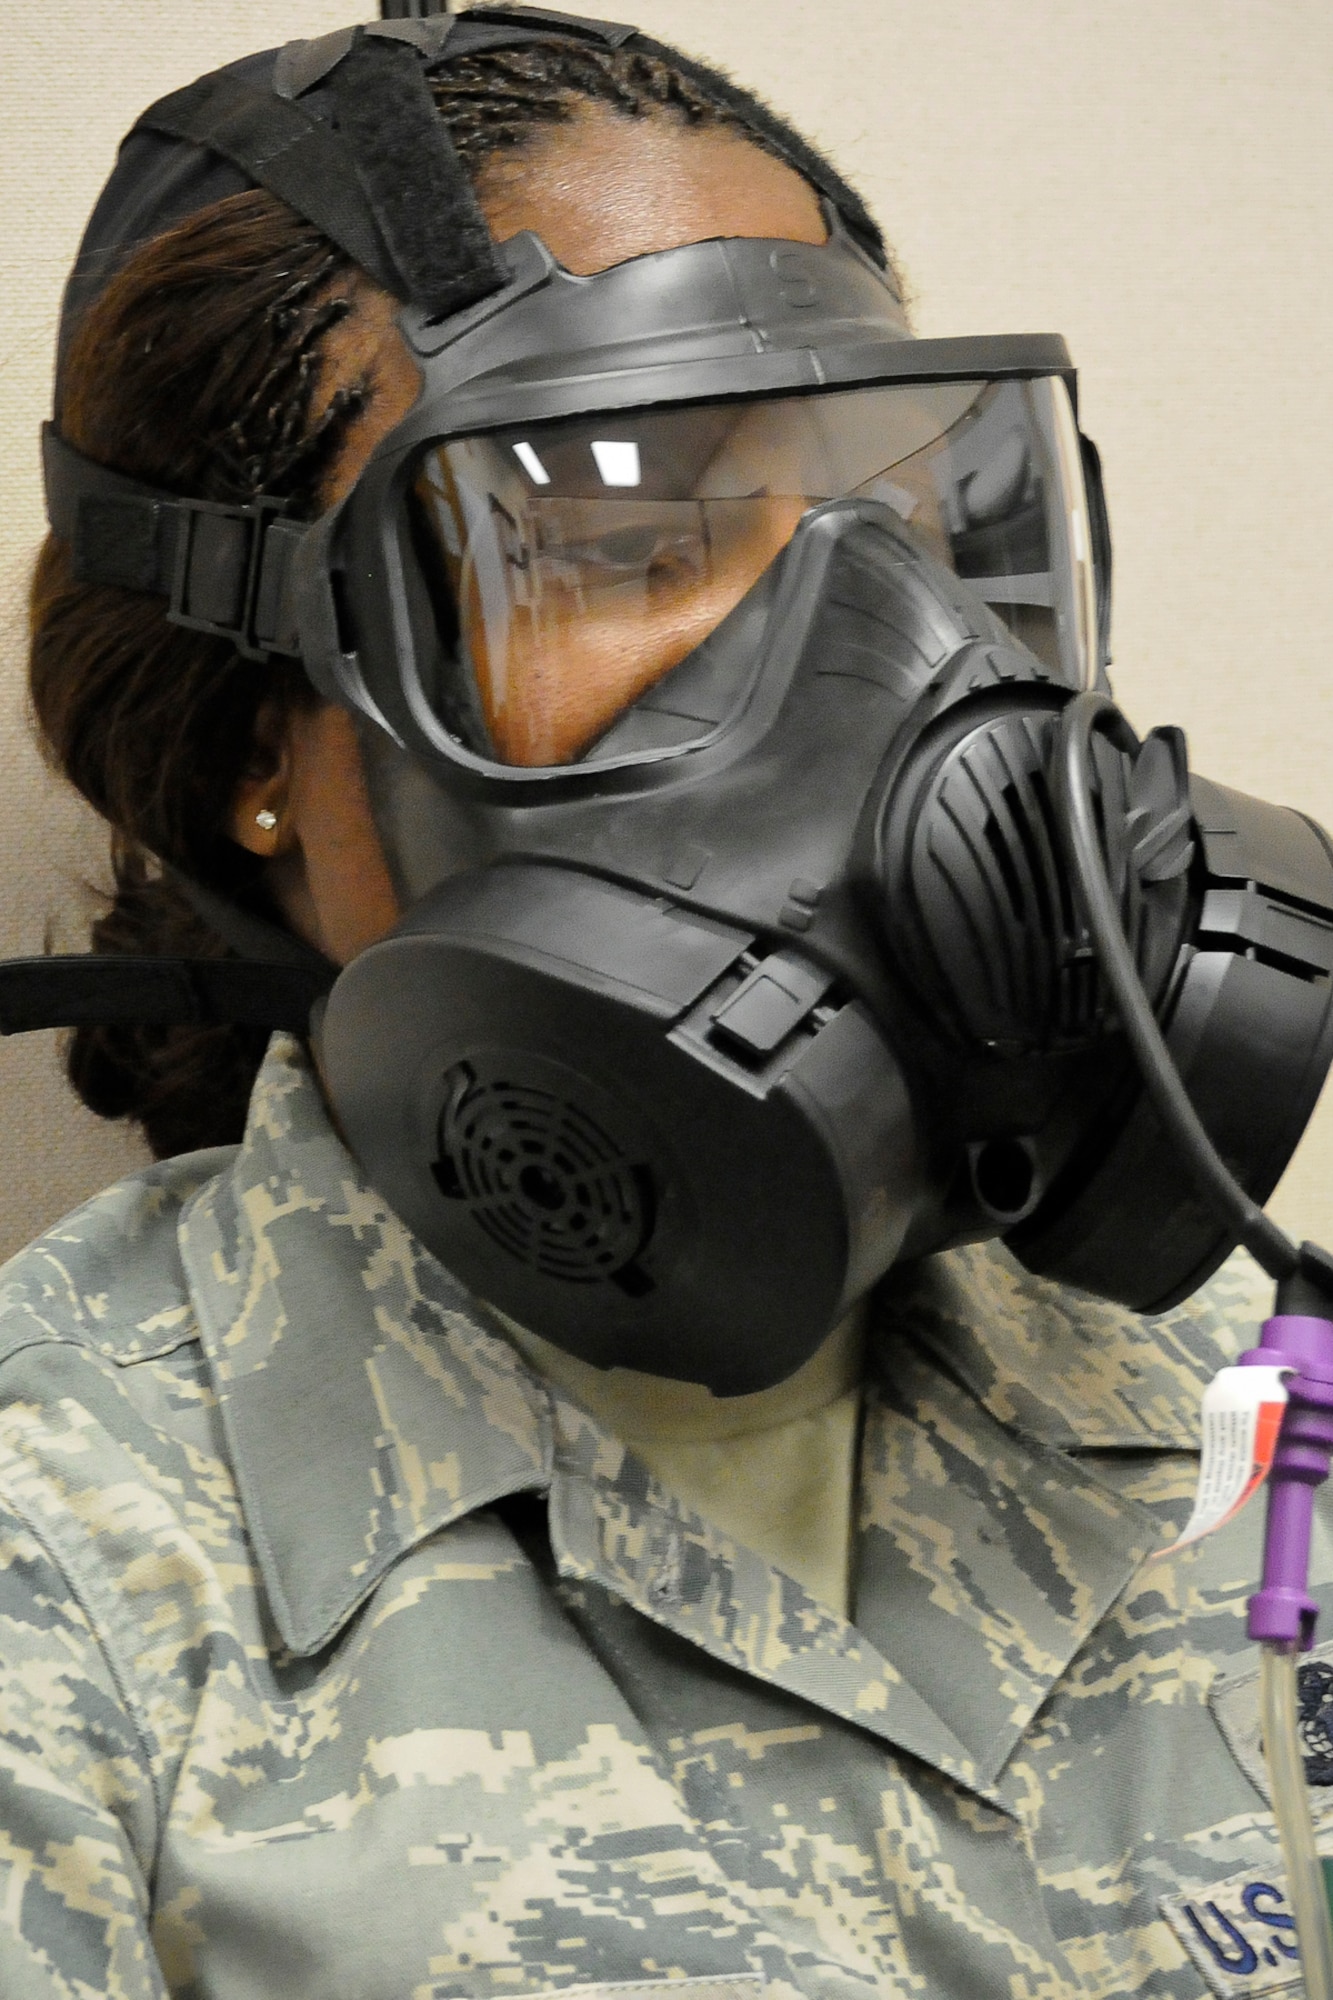 Master Sgt. Leslie Koger of the 245th Air Traffic Control Squadron, McEntire Joint National Guard Base, S.C., patiently completes her new M-50 gas mask "fit test", Oct. 18, 2012.  (National Guard photo by Master Sgt. Marvin R. Preston/Released)